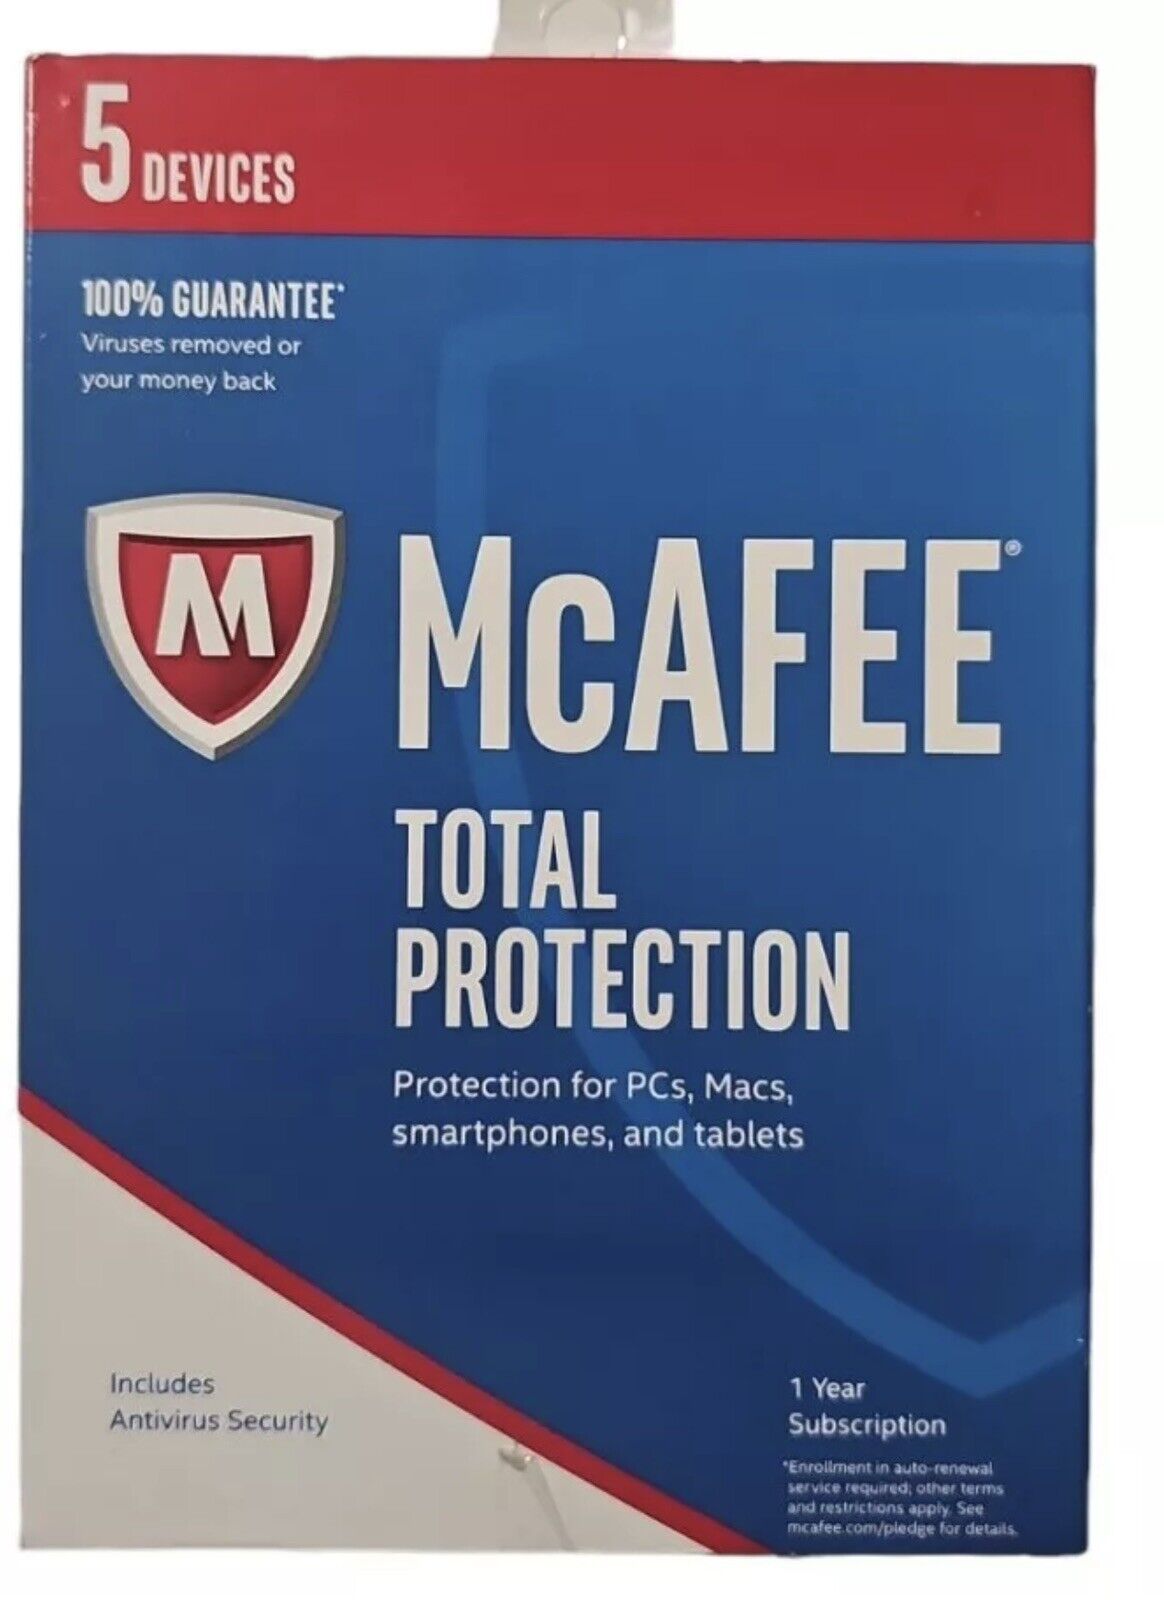 McAfee Total Protection 5 Devices 1 Year PC’s, Mac’s, Smartphones Tablets